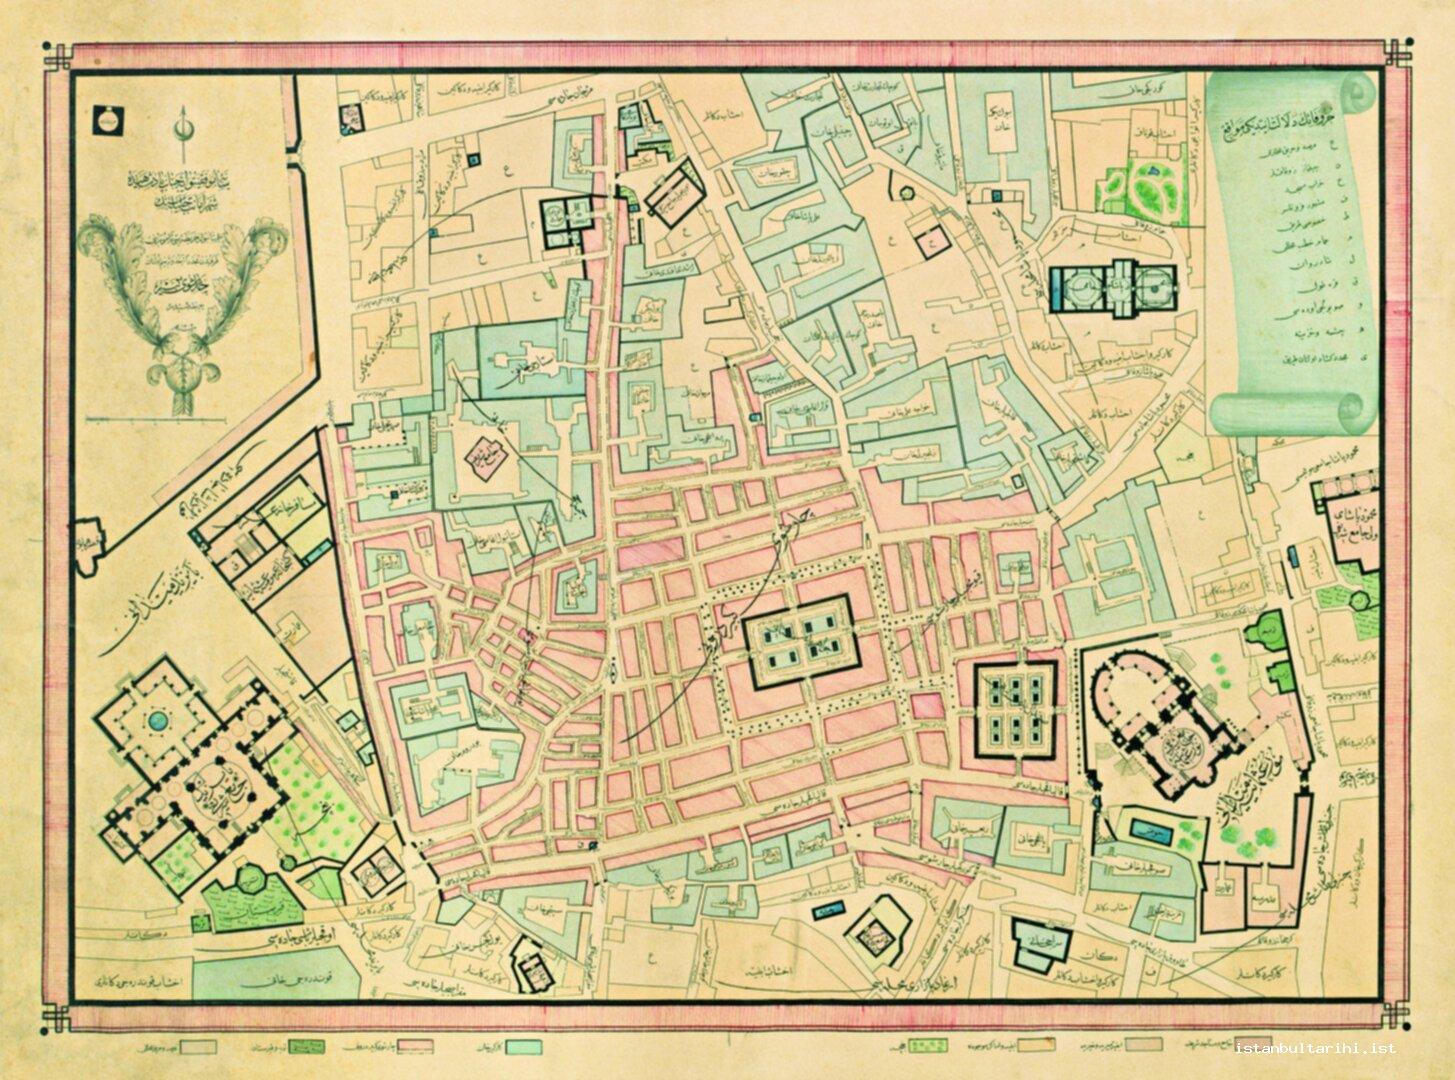 22- Grand Bazaar’s Layout dated 1885-1886 (Istanbul University, Rare Books and Special Collections Library, Maps Section)